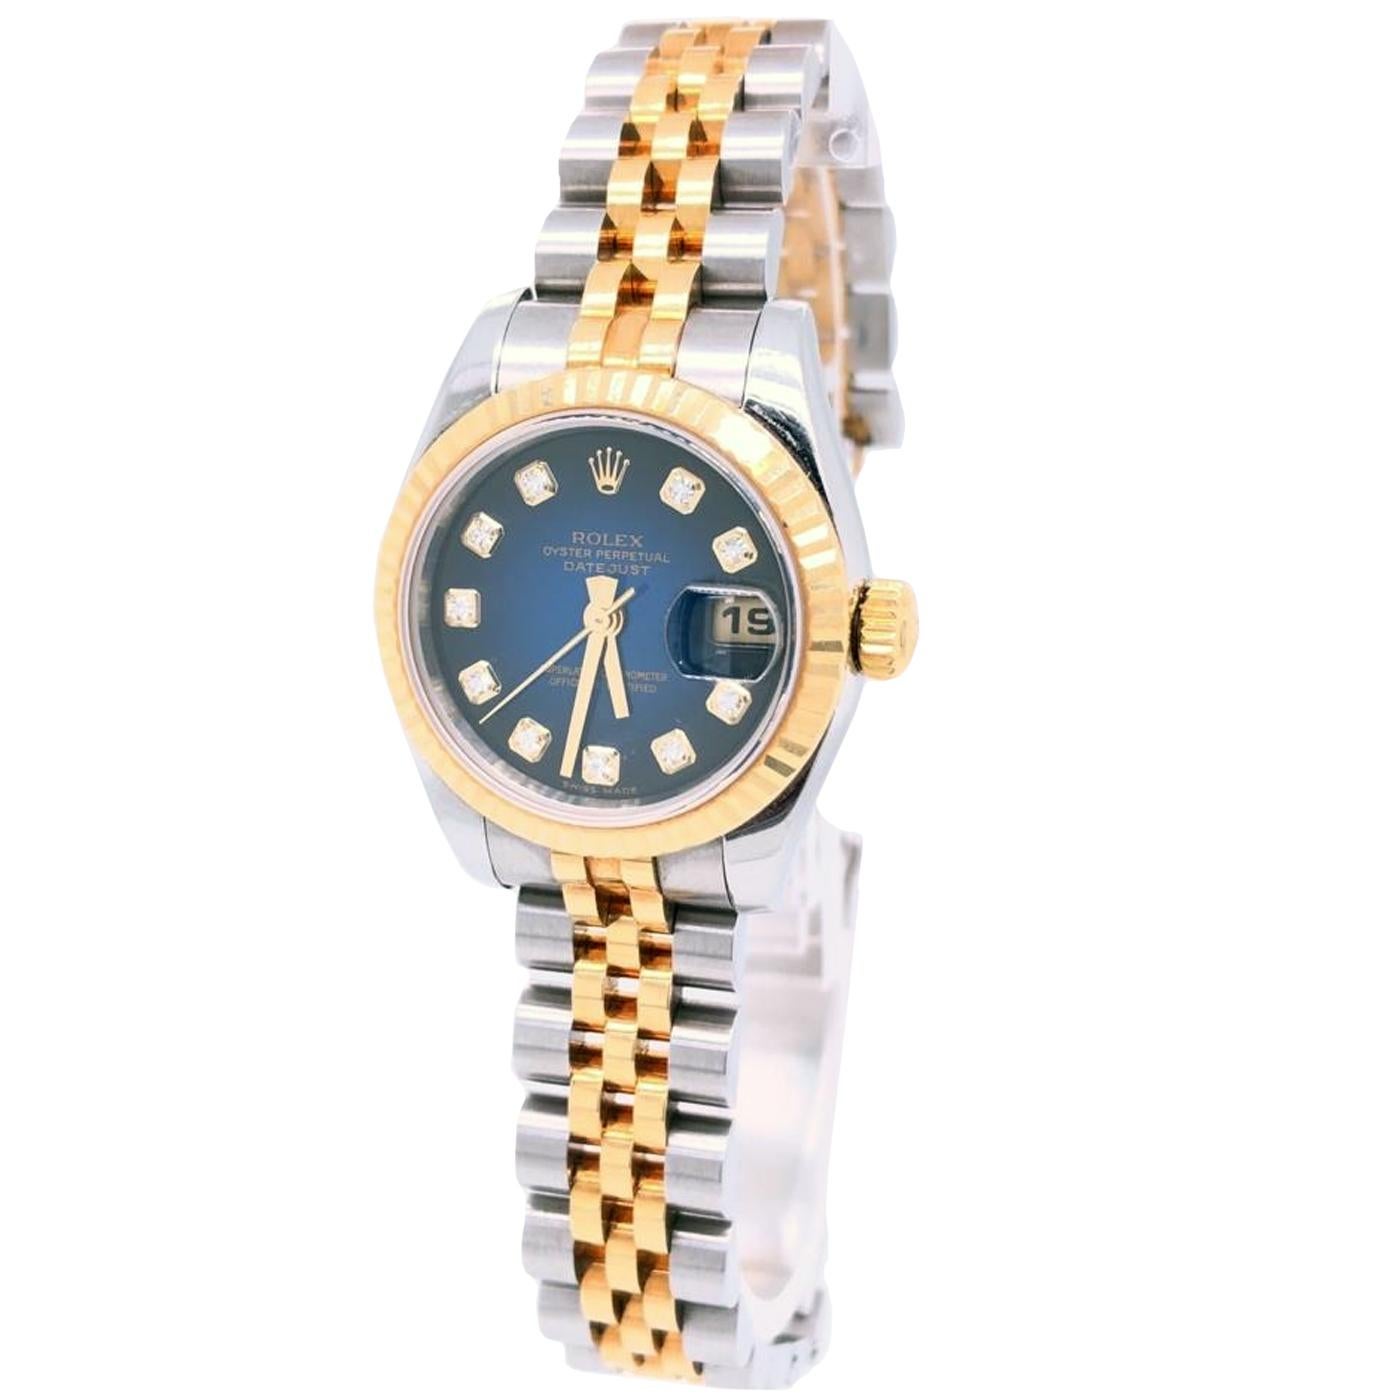 Modernist Rolex Lady-Datejust 26 179173 Blue Diamond Fluted 18K Yellow Gold Jubilee Watch For Sale